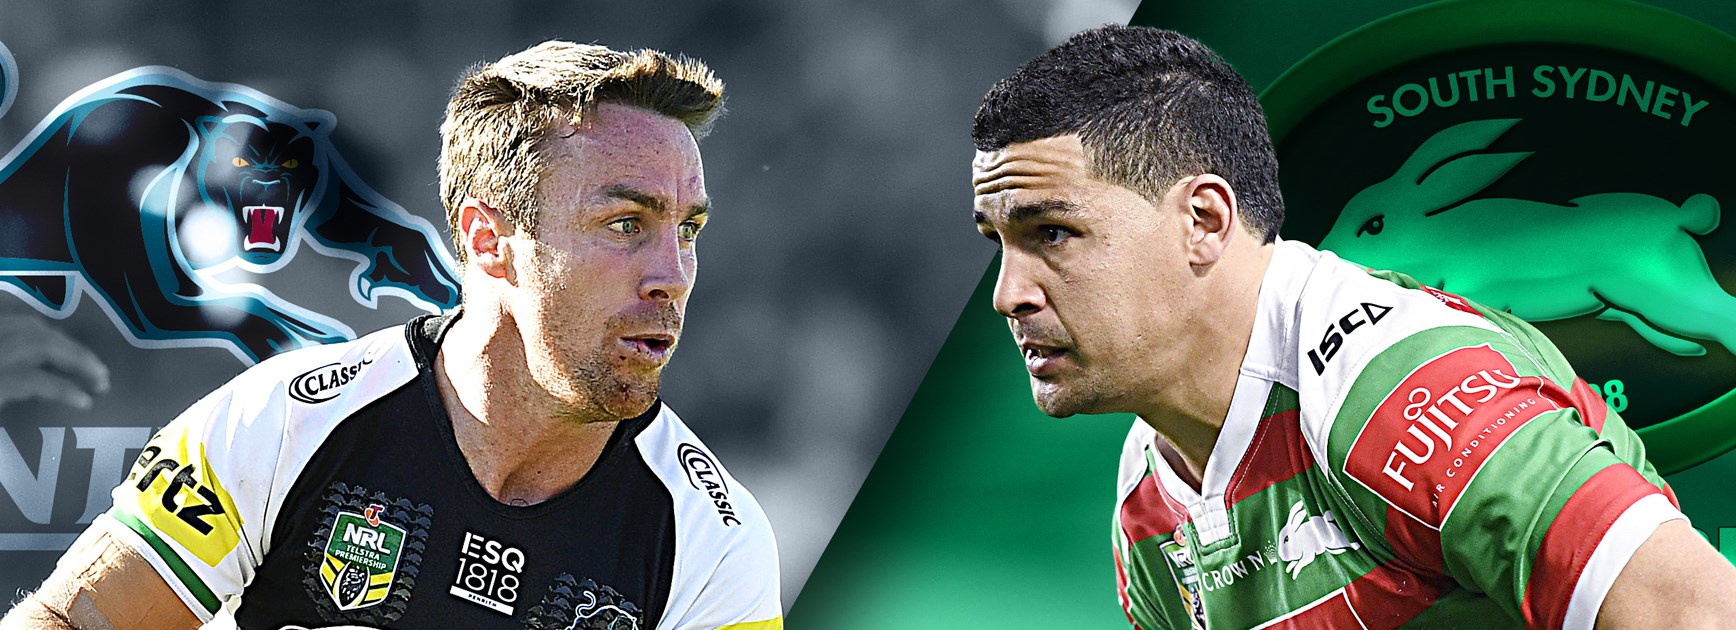 Panthers v Rabbitohs: Doueihi replaces Reynolds